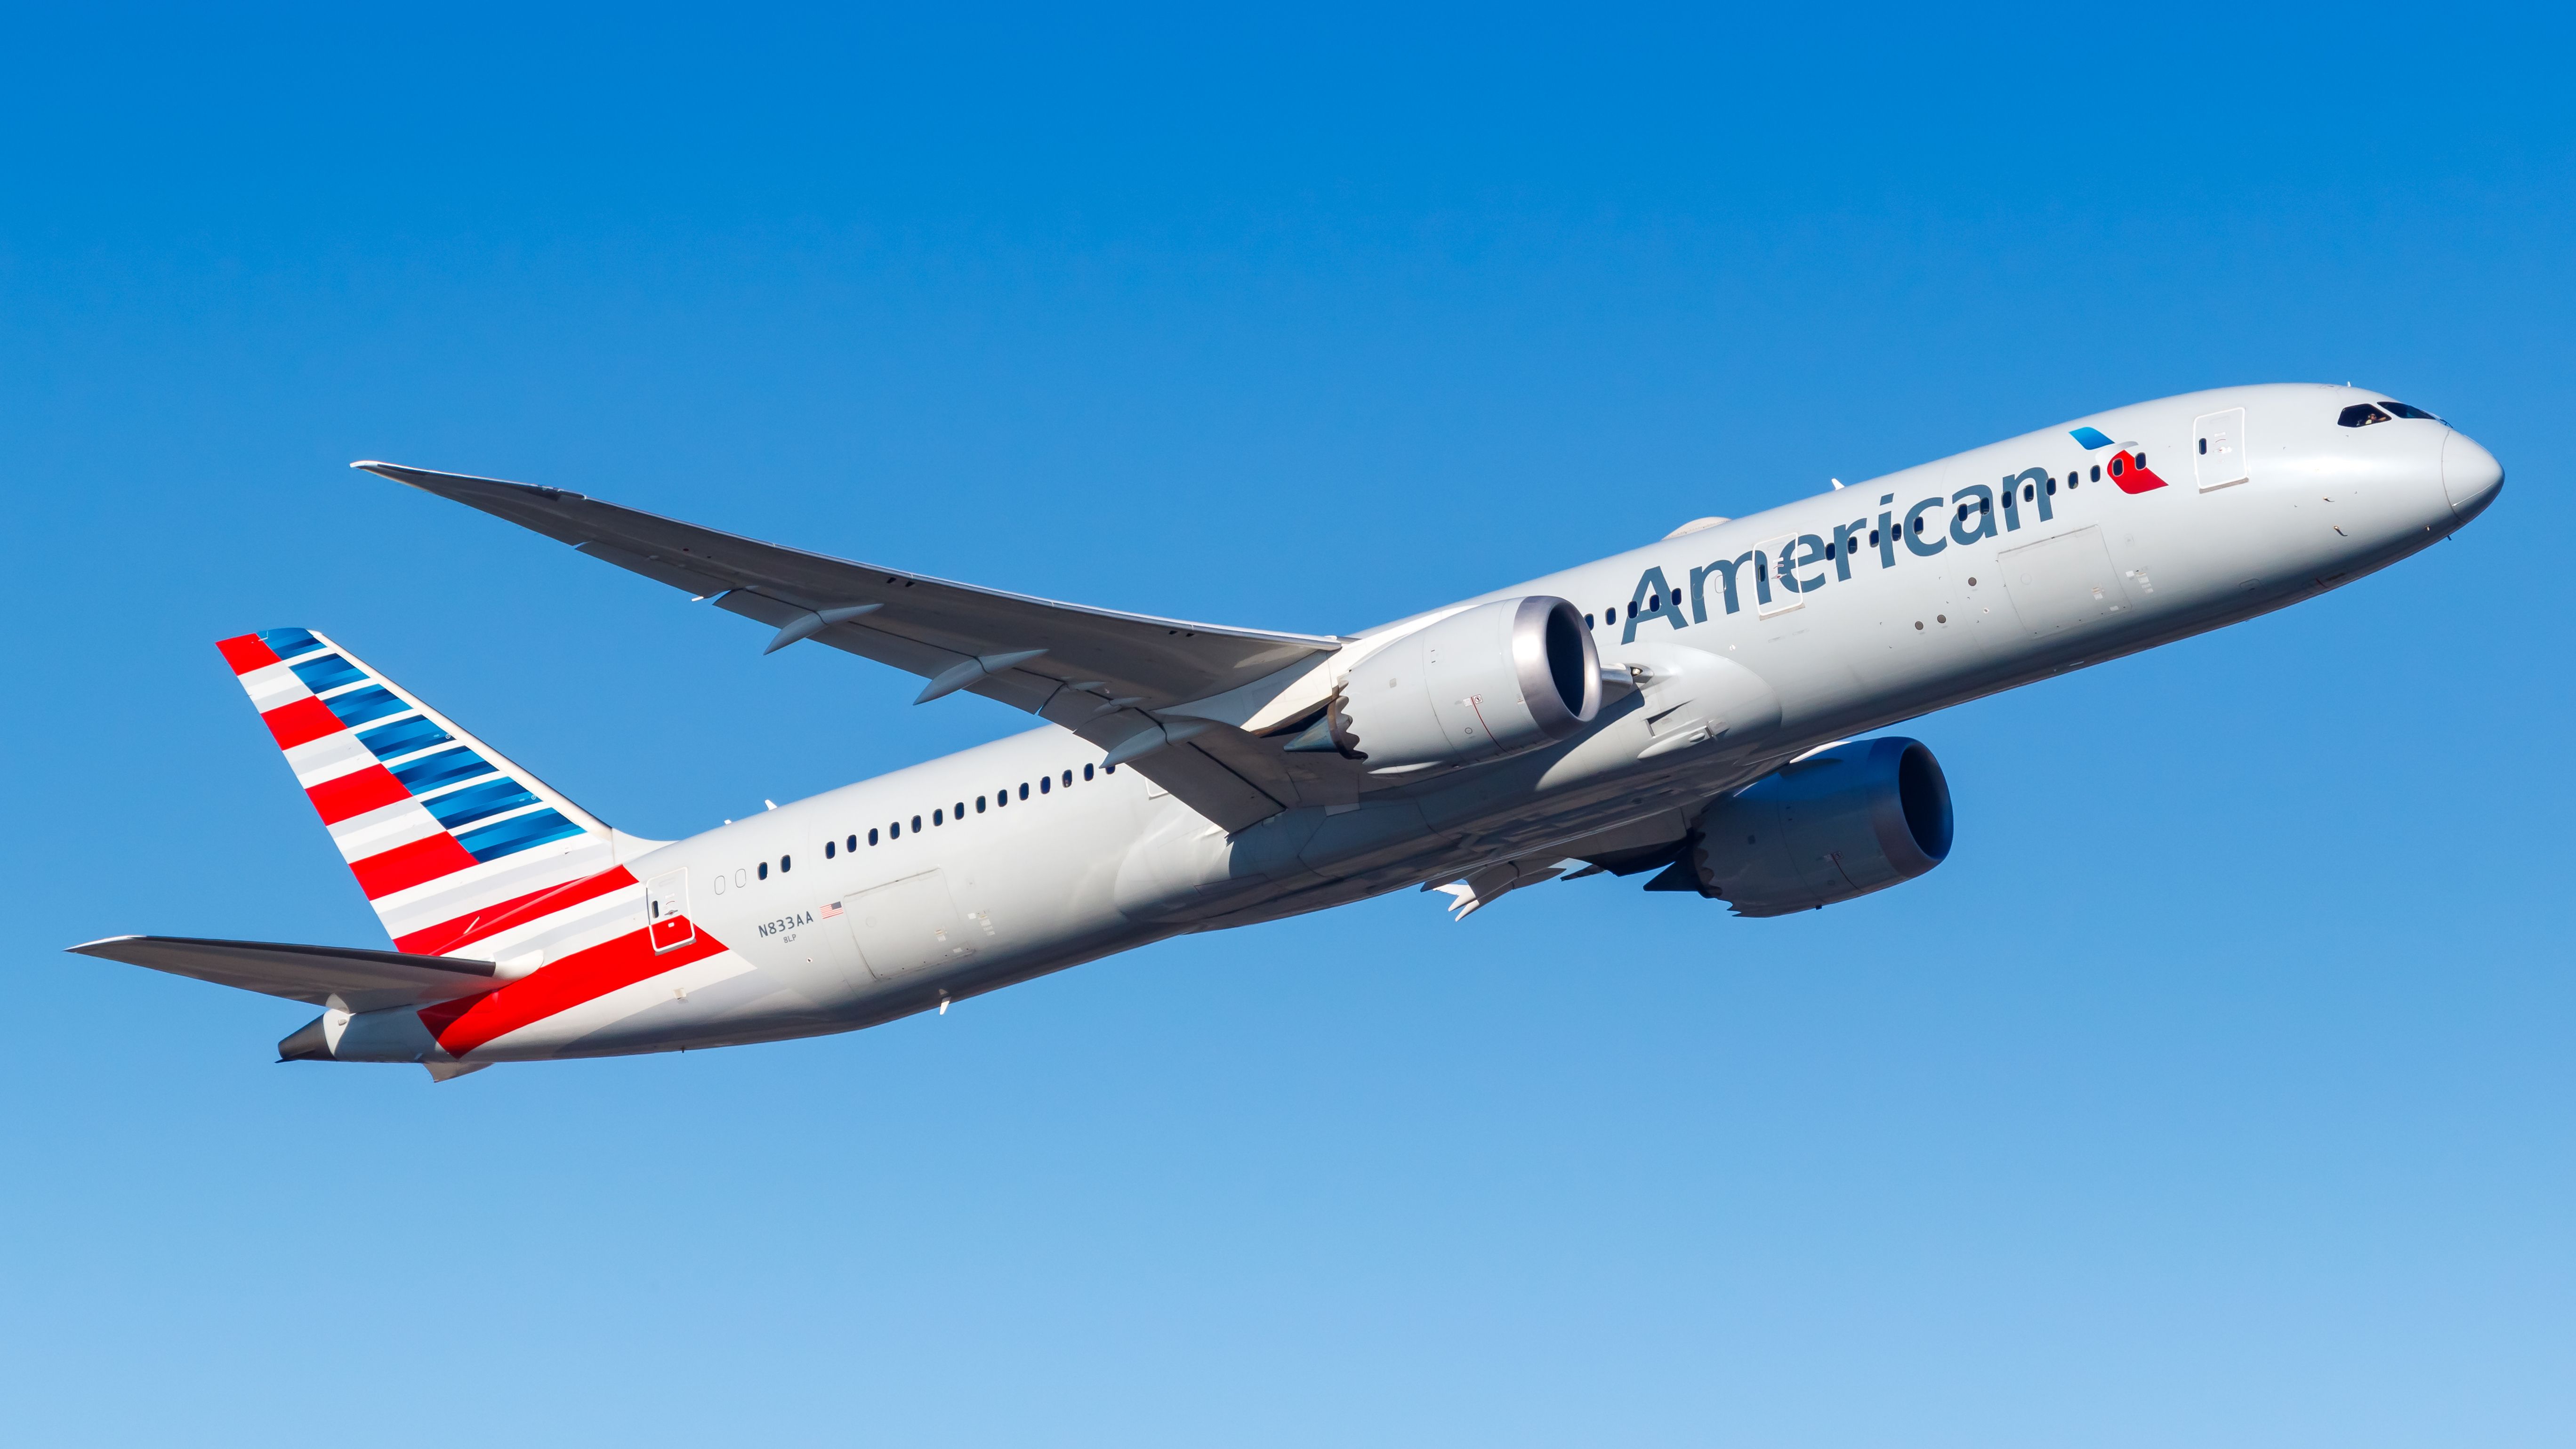 An American Airlines Boeing 787-9 flying in the sky.